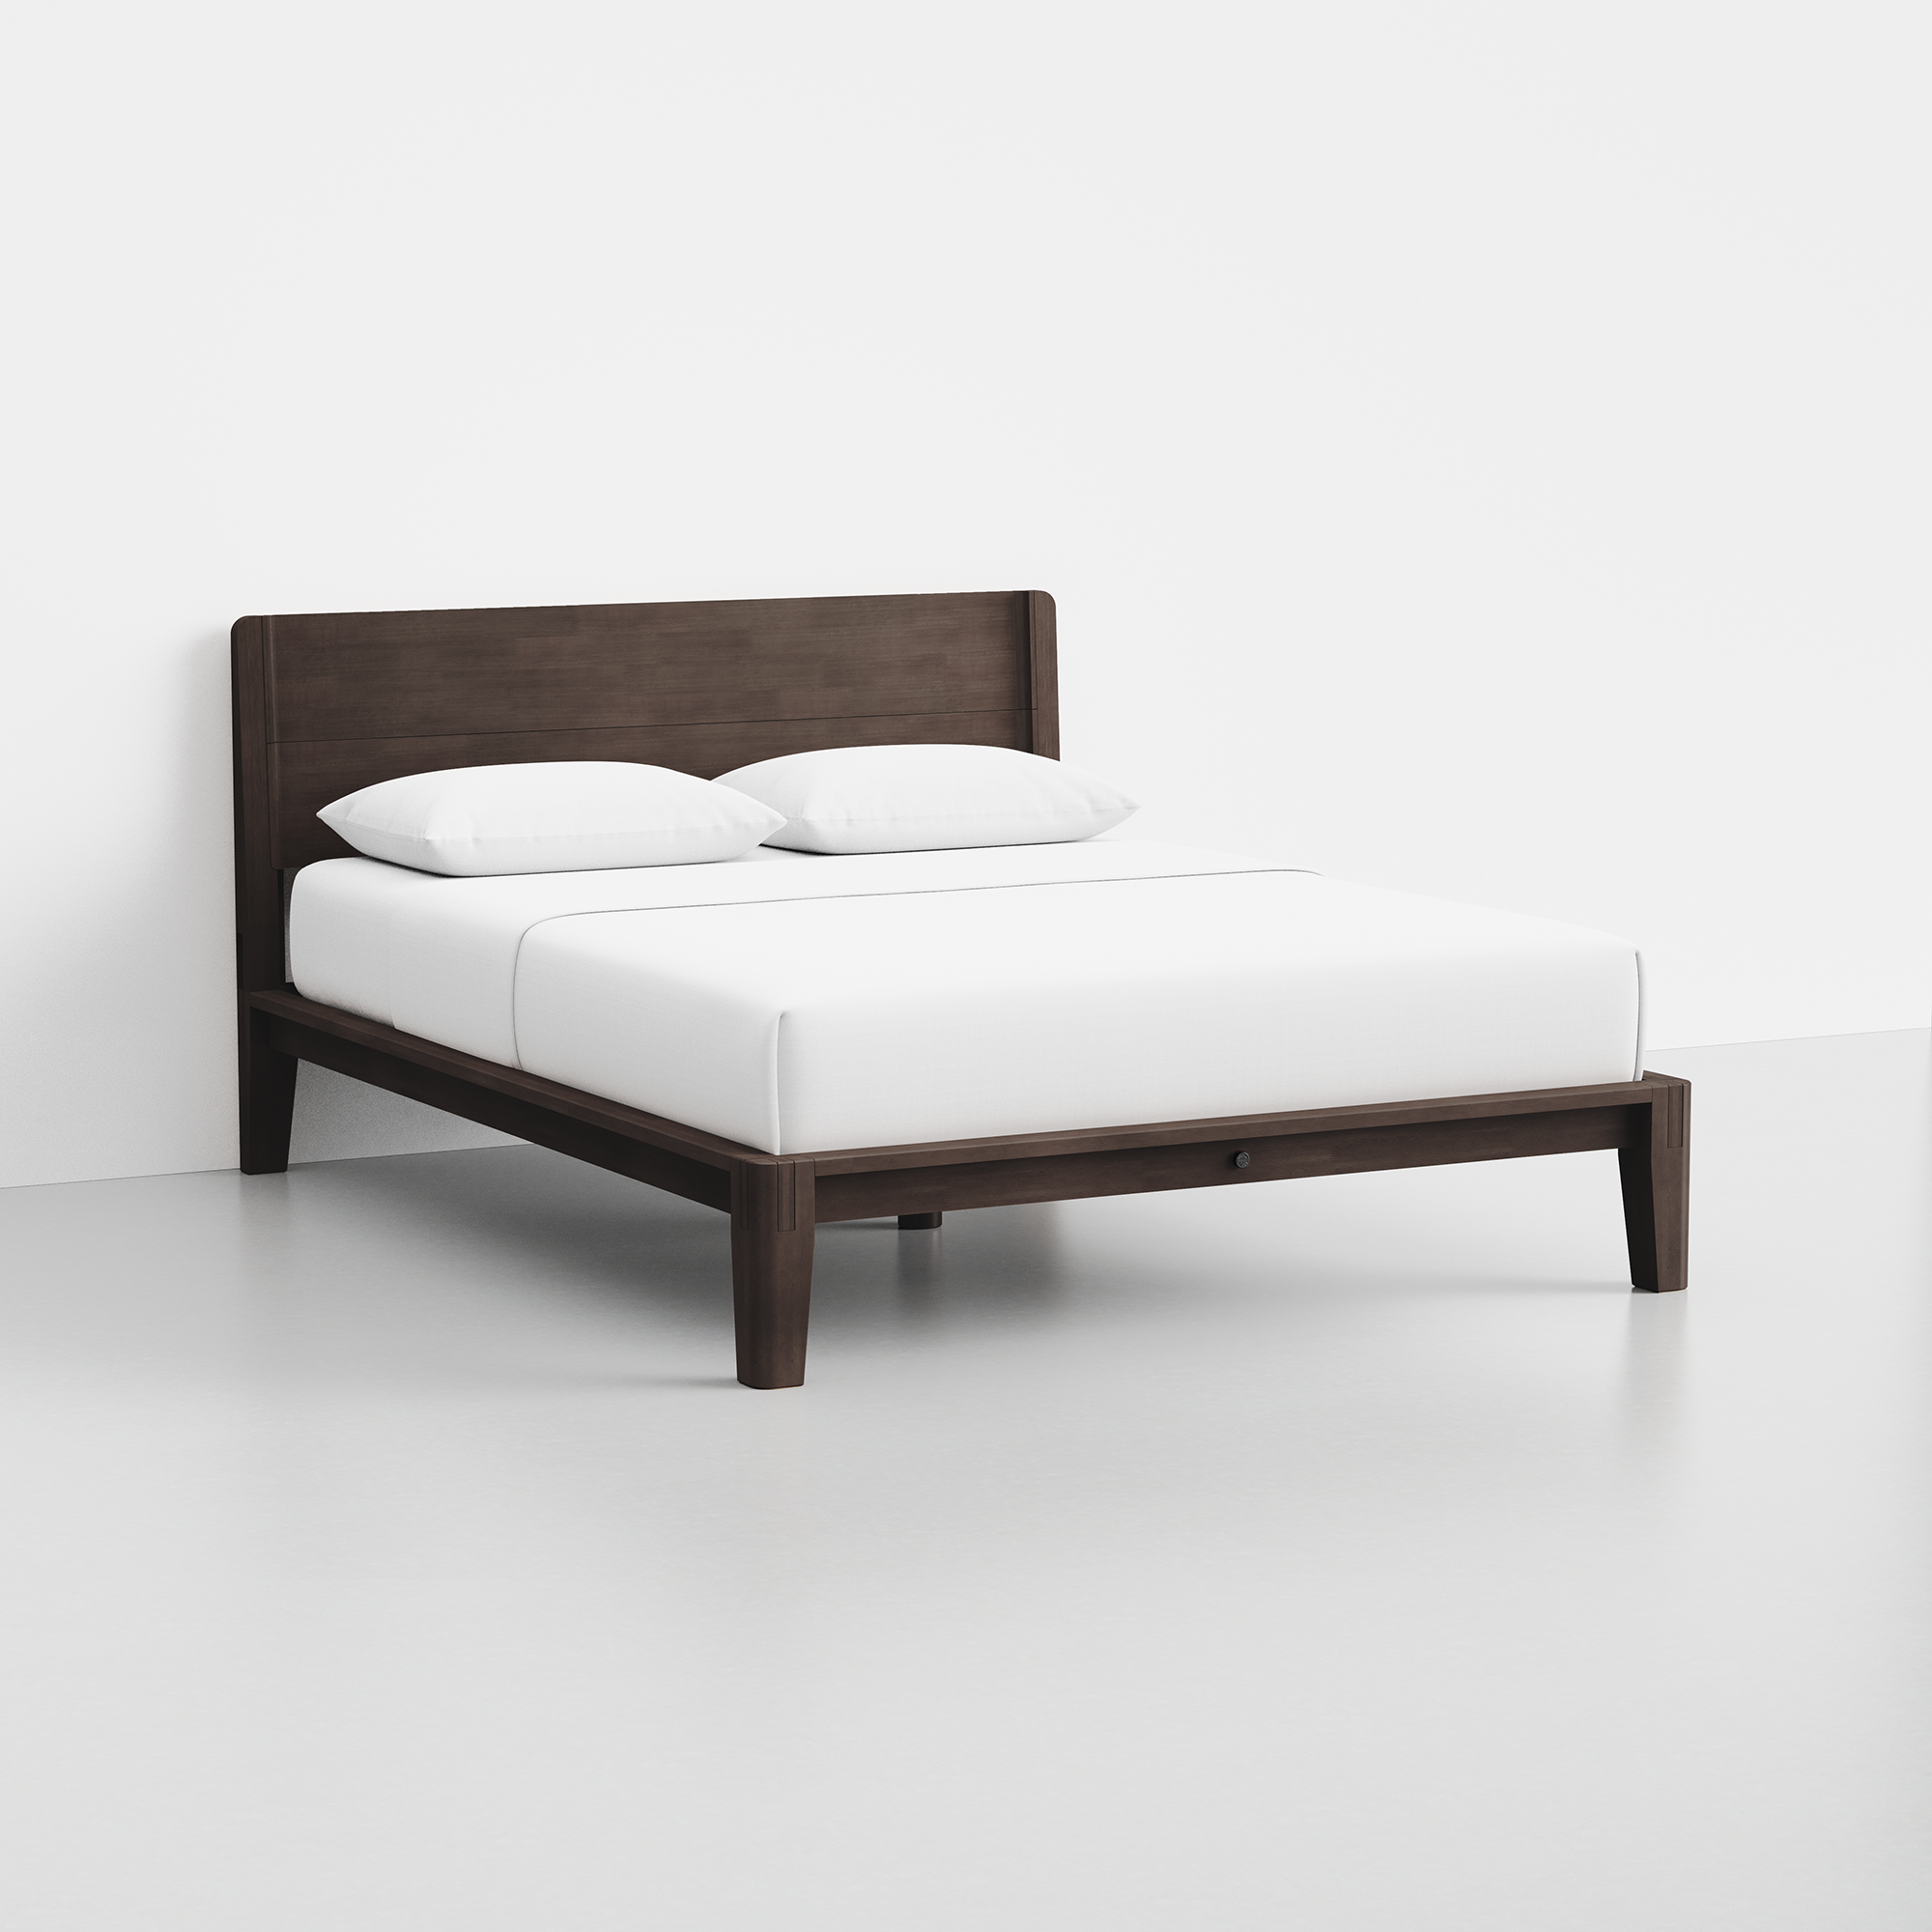 The Bed (Espresso / Headboard) - Render - Angled